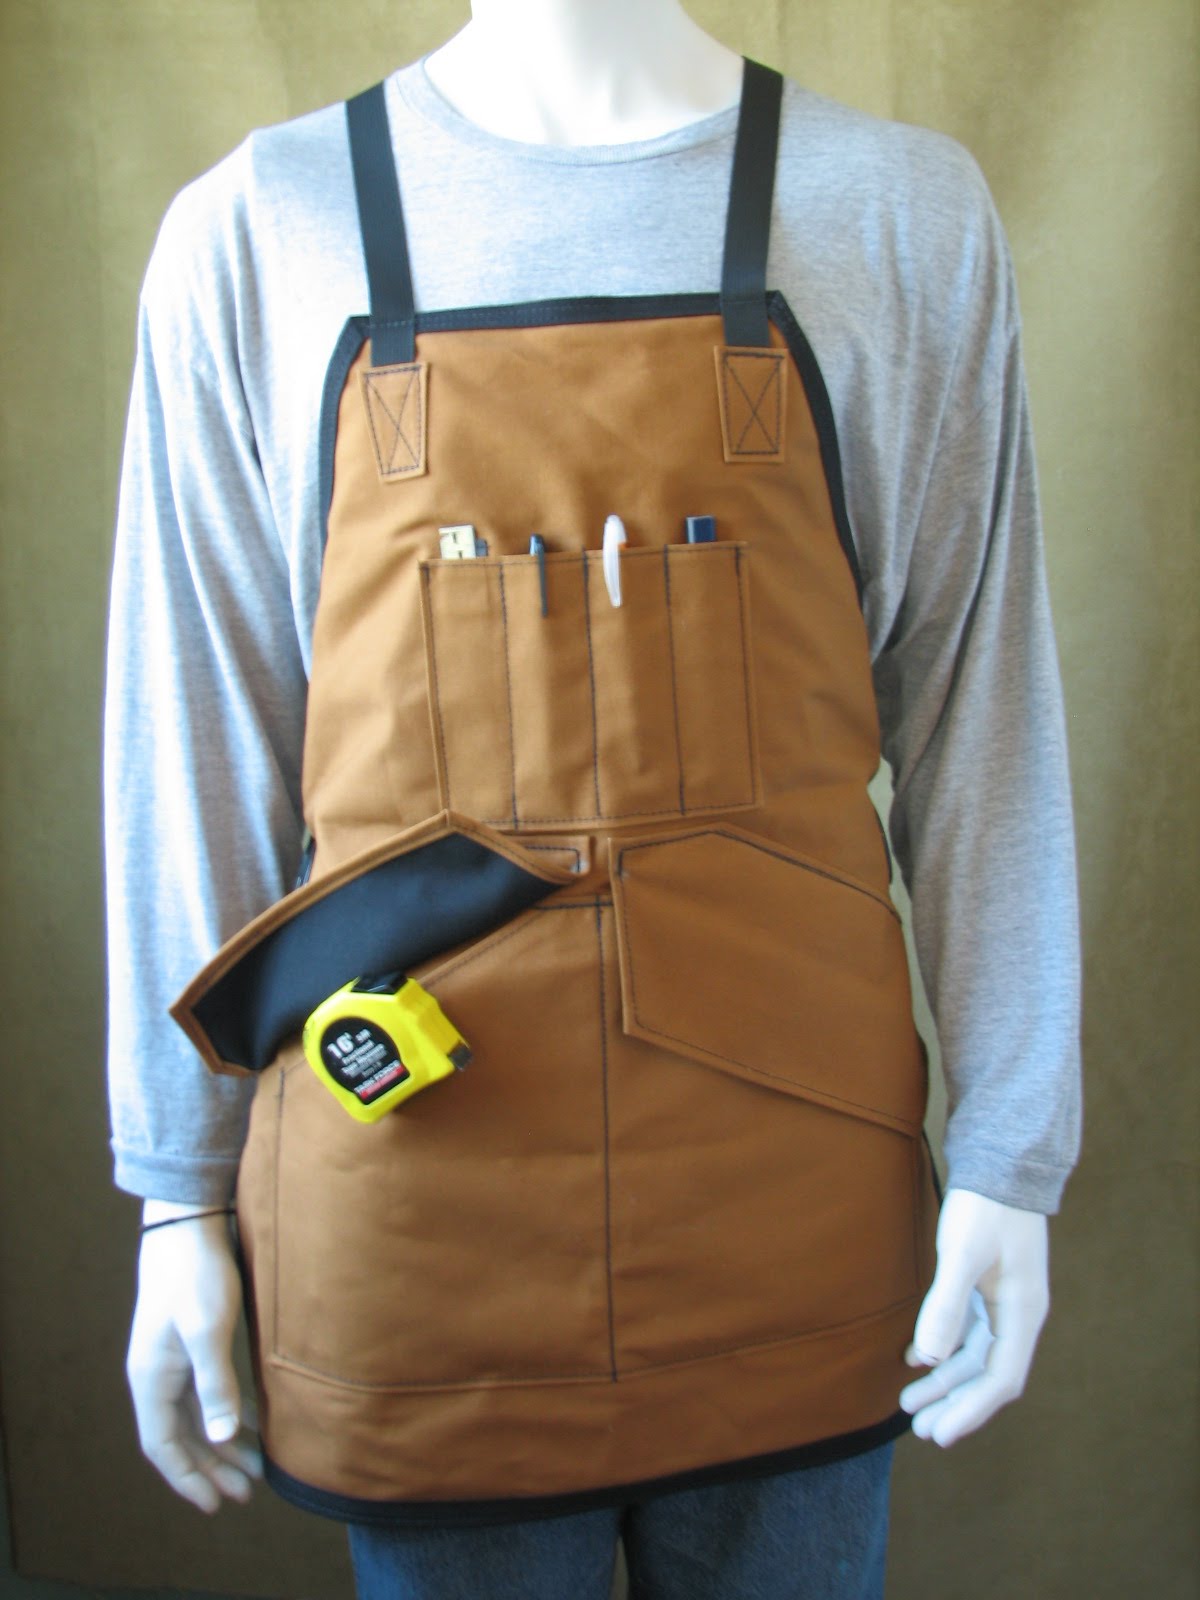 THE CANVAS APRON: September 2010